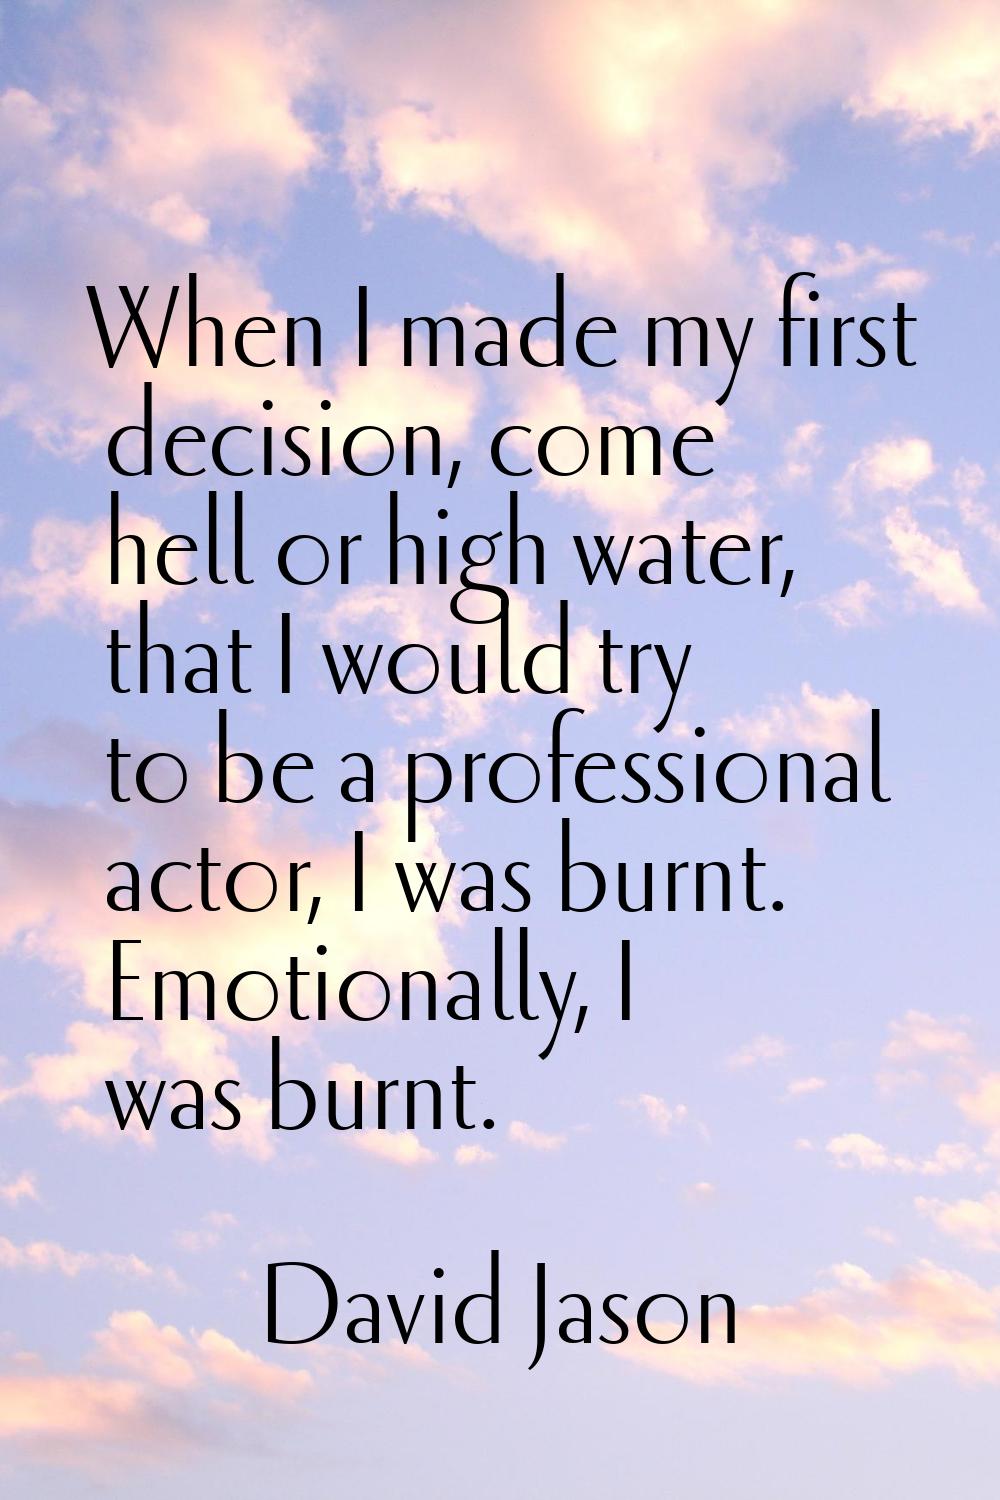 When I made my first decision, come hell or high water, that I would try to be a professional actor